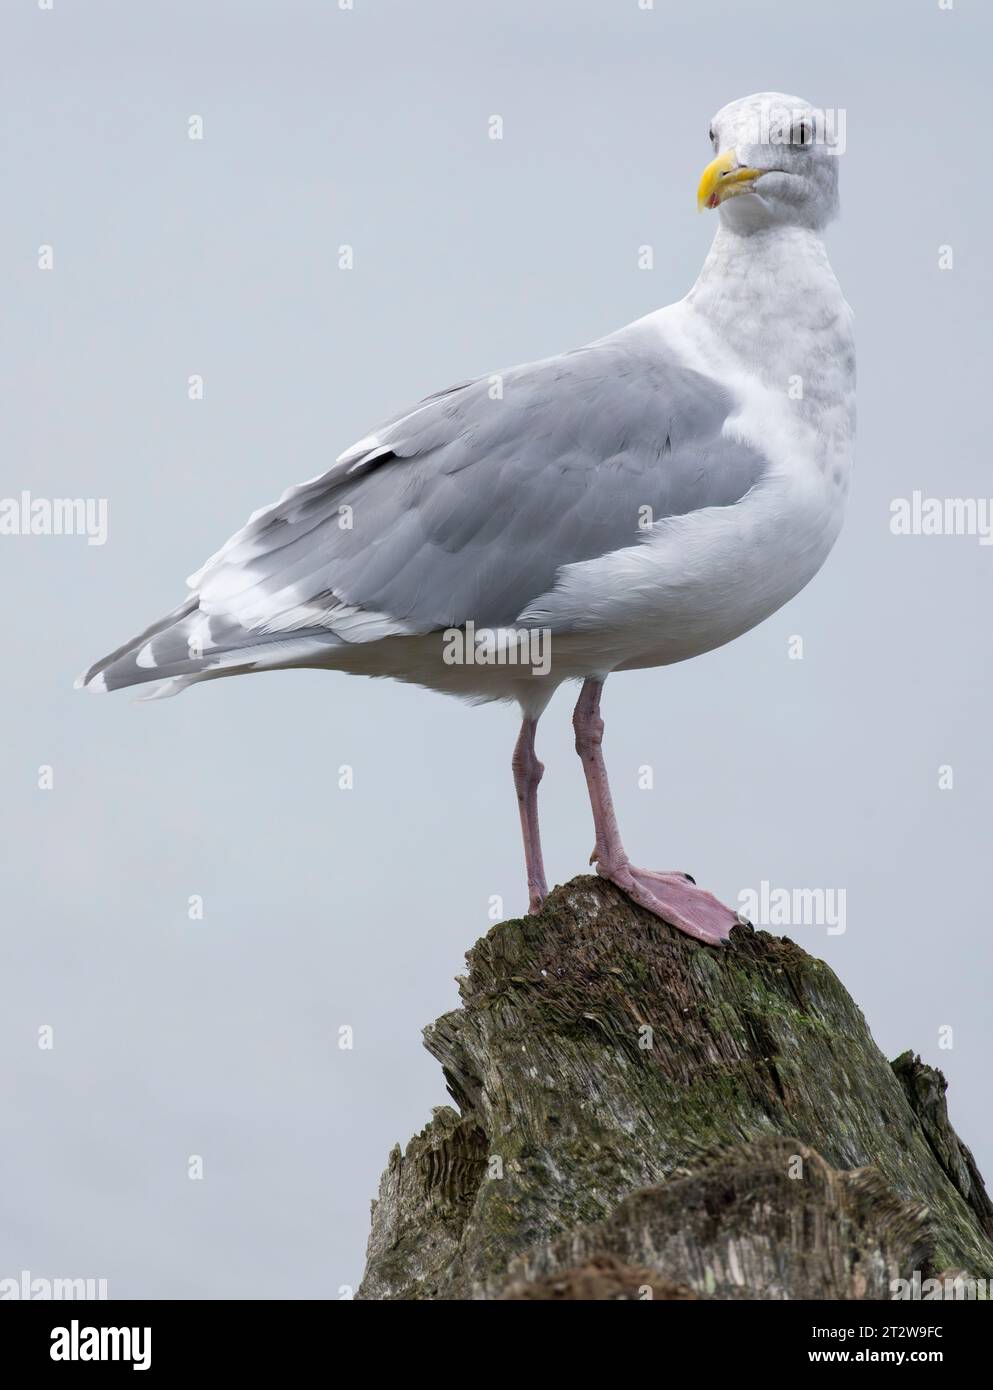 A glaucous gull (Larus hyperboreus) perched on a log on Whiffin Spit in Sooke, British Columbia, Canada. Stock Photo